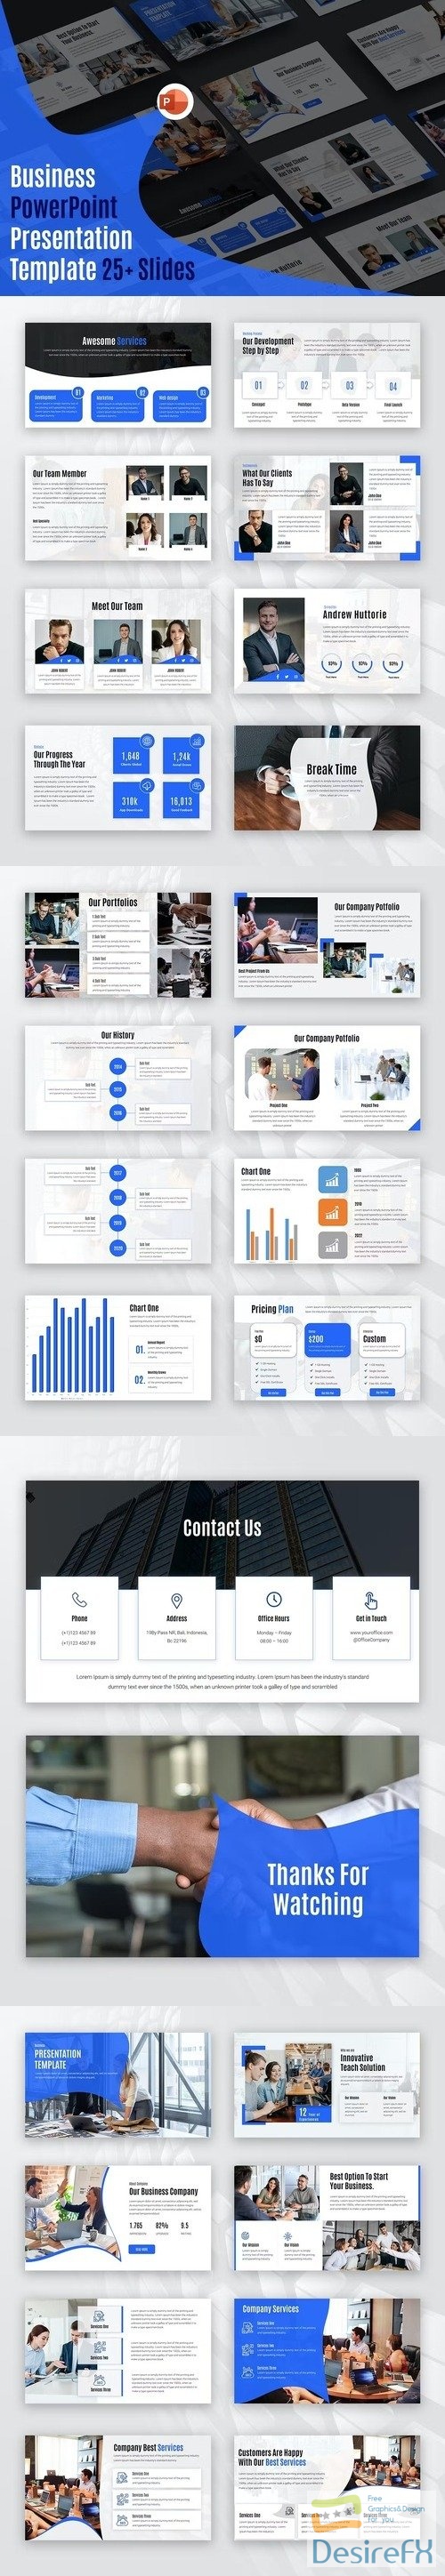 About Company PowerPoint Presentation Template